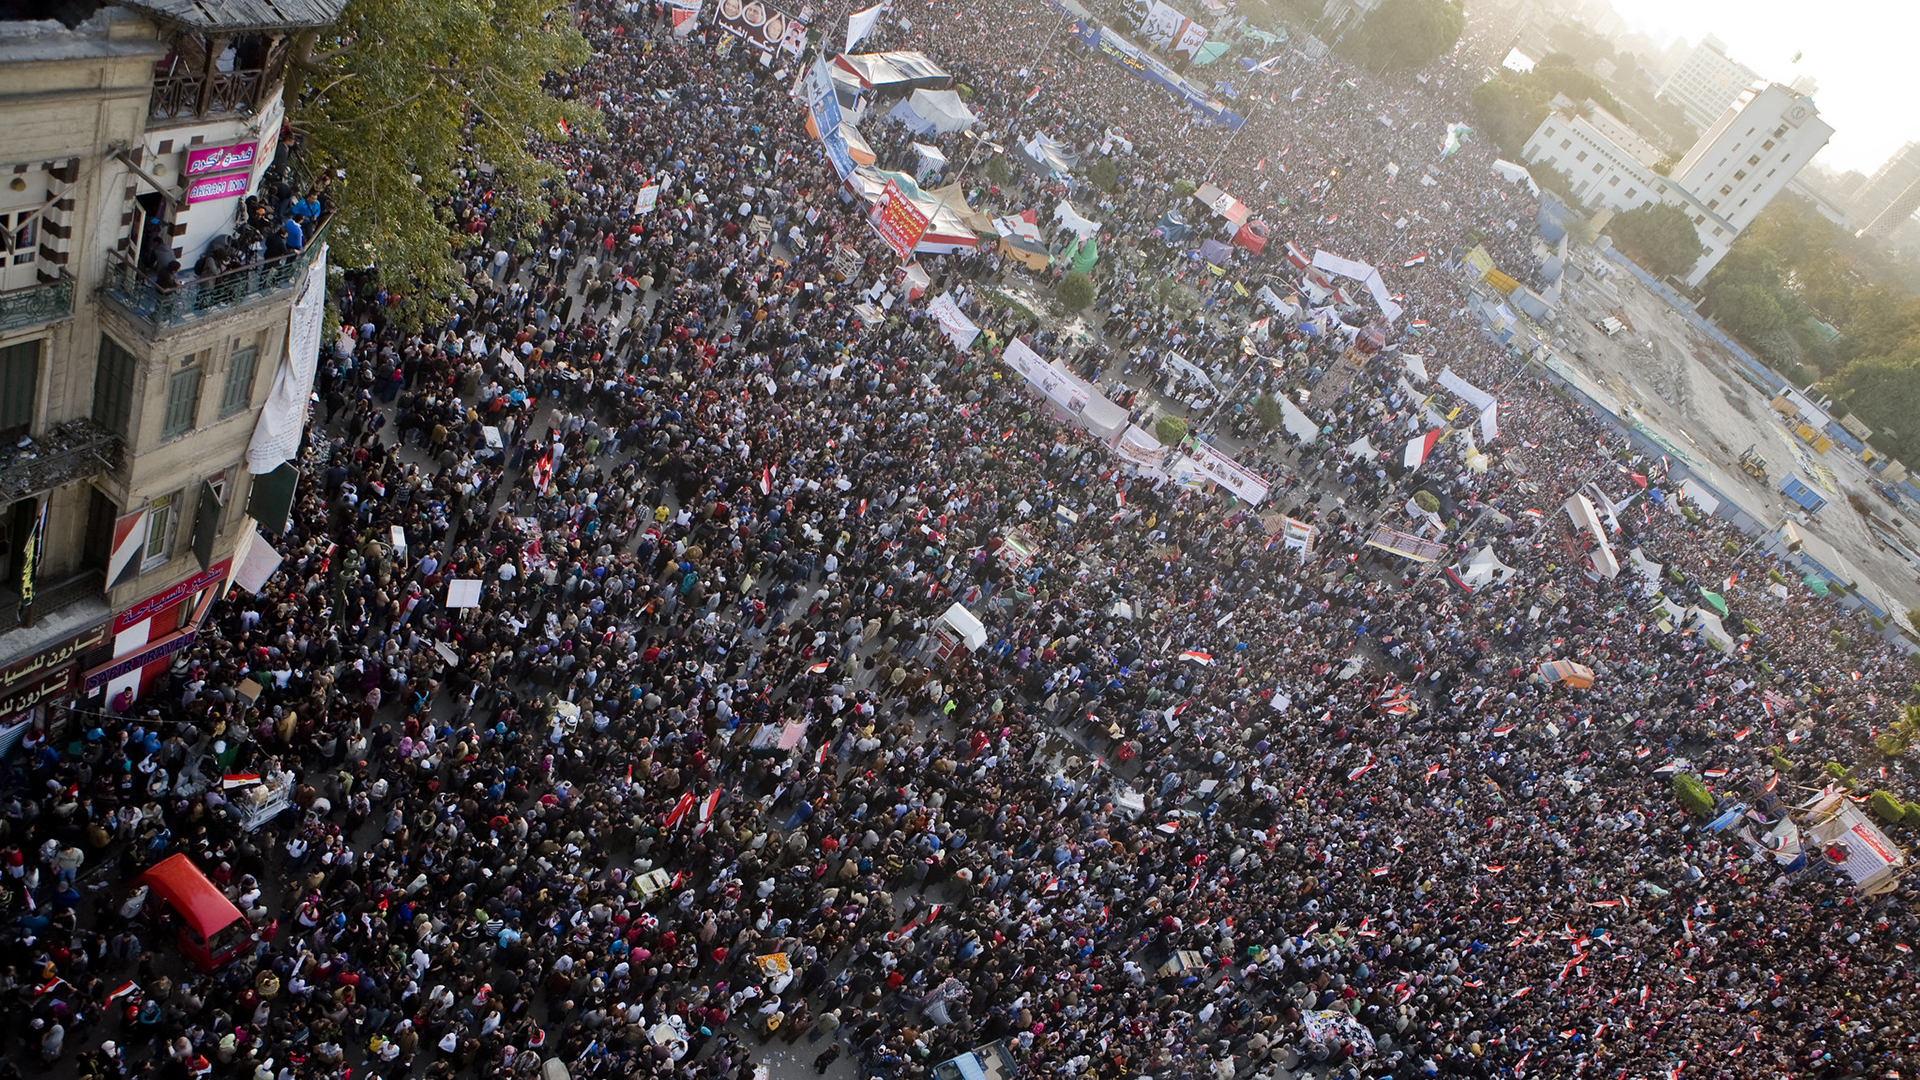 Thousands of people fill Tahrir Square in Egypt during a mass protest on Jan. 25, 2011.